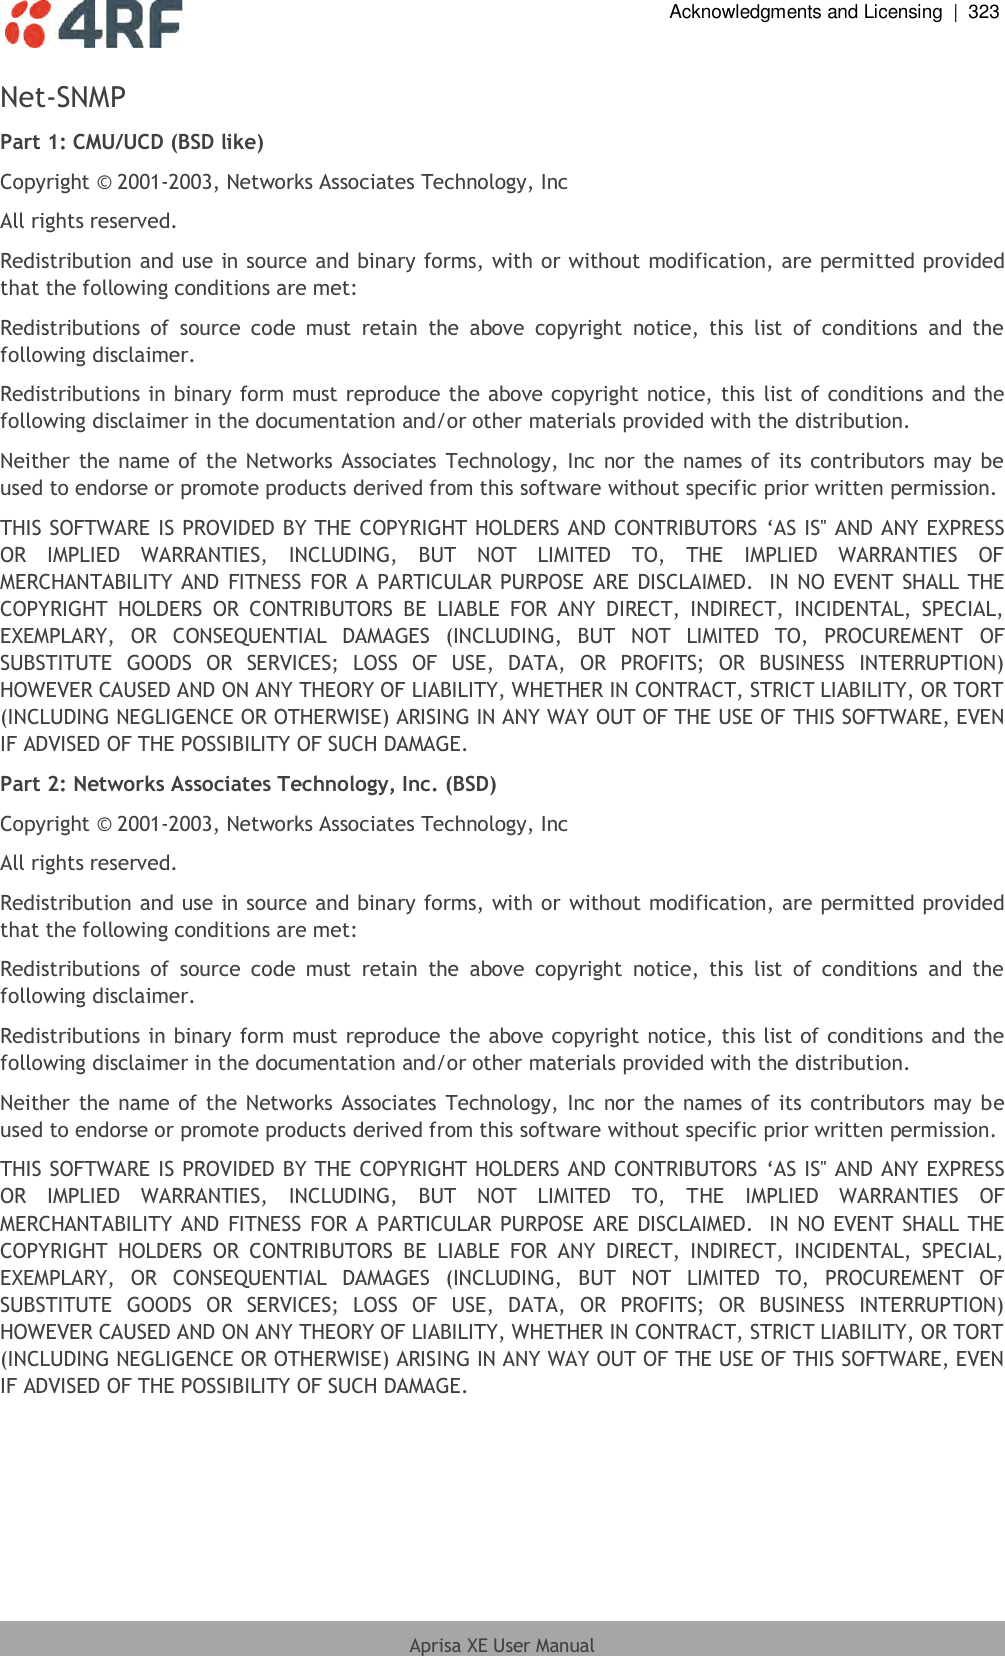  Acknowledgments and Licensing  |  323  Aprisa XE User Manual  Net-SNMP Part 1: CMU/UCD (BSD like) Copyright © 2001-2003, Networks Associates Technology, Inc All rights reserved. Redistribution and use in source and binary forms, with or without modification, are permitted provided that the following conditions are met: Redistributions  of  source  code  must  retain  the  above  copyright  notice,  this  list  of  conditions  and  the following disclaimer. Redistributions in binary form must reproduce the above copyright notice, this list of conditions and the following disclaimer in the documentation and/or other materials provided with the distribution. Neither the name of the Networks  Associates Technology, Inc nor the names of its contributors  may be used to endorse or promote products derived from this software without specific prior written permission. THIS SOFTWARE IS PROVIDED BY THE COPYRIGHT HOLDERS AND CONTRIBUTORS ‘AS IS&apos;&apos; AND ANY EXPRESS OR  IMPLIED  WARRANTIES,  INCLUDING,  BUT  NOT  LIMITED  TO,  THE  IMPLIED  WARRANTIES  OF MERCHANTABILITY AND FITNESS FOR A PARTICULAR PURPOSE  ARE DISCLAIMED.  IN NO EVENT SHALL THE COPYRIGHT  HOLDERS  OR  CONTRIBUTORS  BE  LIABLE  FOR  ANY  DIRECT,  INDIRECT,  INCIDENTAL,  SPECIAL, EXEMPLARY,  OR  CONSEQUENTIAL  DAMAGES  (INCLUDING,  BUT  NOT  LIMITED  TO,  PROCUREMENT  OF SUBSTITUTE  GOODS  OR  SERVICES;  LOSS  OF  USE,  DATA,  OR  PROFITS;  OR  BUSINESS  INTERRUPTION) HOWEVER CAUSED AND ON ANY THEORY OF LIABILITY, WHETHER IN CONTRACT, STRICT LIABILITY, OR TORT (INCLUDING NEGLIGENCE OR OTHERWISE) ARISING IN ANY WAY OUT OF THE USE OF THIS SOFTWARE, EVEN IF ADVISED OF THE POSSIBILITY OF SUCH DAMAGE. Part 2: Networks Associates Technology, Inc. (BSD) Copyright © 2001-2003, Networks Associates Technology, Inc All rights reserved. Redistribution and use in source and binary forms, with or without modification, are permitted provided that the following conditions are met: Redistributions  of  source  code  must  retain  the  above  copyright  notice,  this  list  of  conditions  and  the following disclaimer. Redistributions in binary form must reproduce the above copyright notice, this list of conditions and the following disclaimer in the documentation and/or other materials provided with the distribution. Neither the name of the Networks  Associates Technology, Inc nor the names of its contributors  may be used to endorse or promote products derived from this software without specific prior written permission. THIS SOFTWARE IS PROVIDED BY THE COPYRIGHT HOLDERS AND CONTRIBUTORS ‘AS IS&apos;&apos; AND ANY EXPRESS OR  IMPLIED  WARRANTIES,  INCLUDING,  BUT  NOT  LIMITED  TO,  THE  IMPLIED  WARRANTIES  OF MERCHANTABILITY AND FITNESS  FOR A PARTICULAR PURPOSE ARE DISCLAIMED.  IN NO EVENT SHALL THE COPYRIGHT  HOLDERS  OR  CONTRIBUTORS  BE  LIABLE  FOR  ANY  DIRECT,  INDIRECT,  INCIDENTAL,  SPECIAL, EXEMPLARY,  OR  CONSEQUENTIAL  DAMAGES  (INCLUDING,  BUT  NOT  LIMITED  TO,  PROCUREMENT  OF SUBSTITUTE  GOODS  OR  SERVICES;  LOSS  OF  USE,  DATA,  OR  PROFITS;  OR  BUSINESS  INTERRUPTION) HOWEVER CAUSED AND ON ANY THEORY OF LIABILITY, WHETHER IN CONTRACT, STRICT LIABILITY, OR TORT (INCLUDING NEGLIGENCE OR OTHERWISE) ARISING IN ANY WAY OUT OF THE USE OF THIS SOFTWARE, EVEN IF ADVISED OF THE POSSIBILITY OF SUCH DAMAGE. 